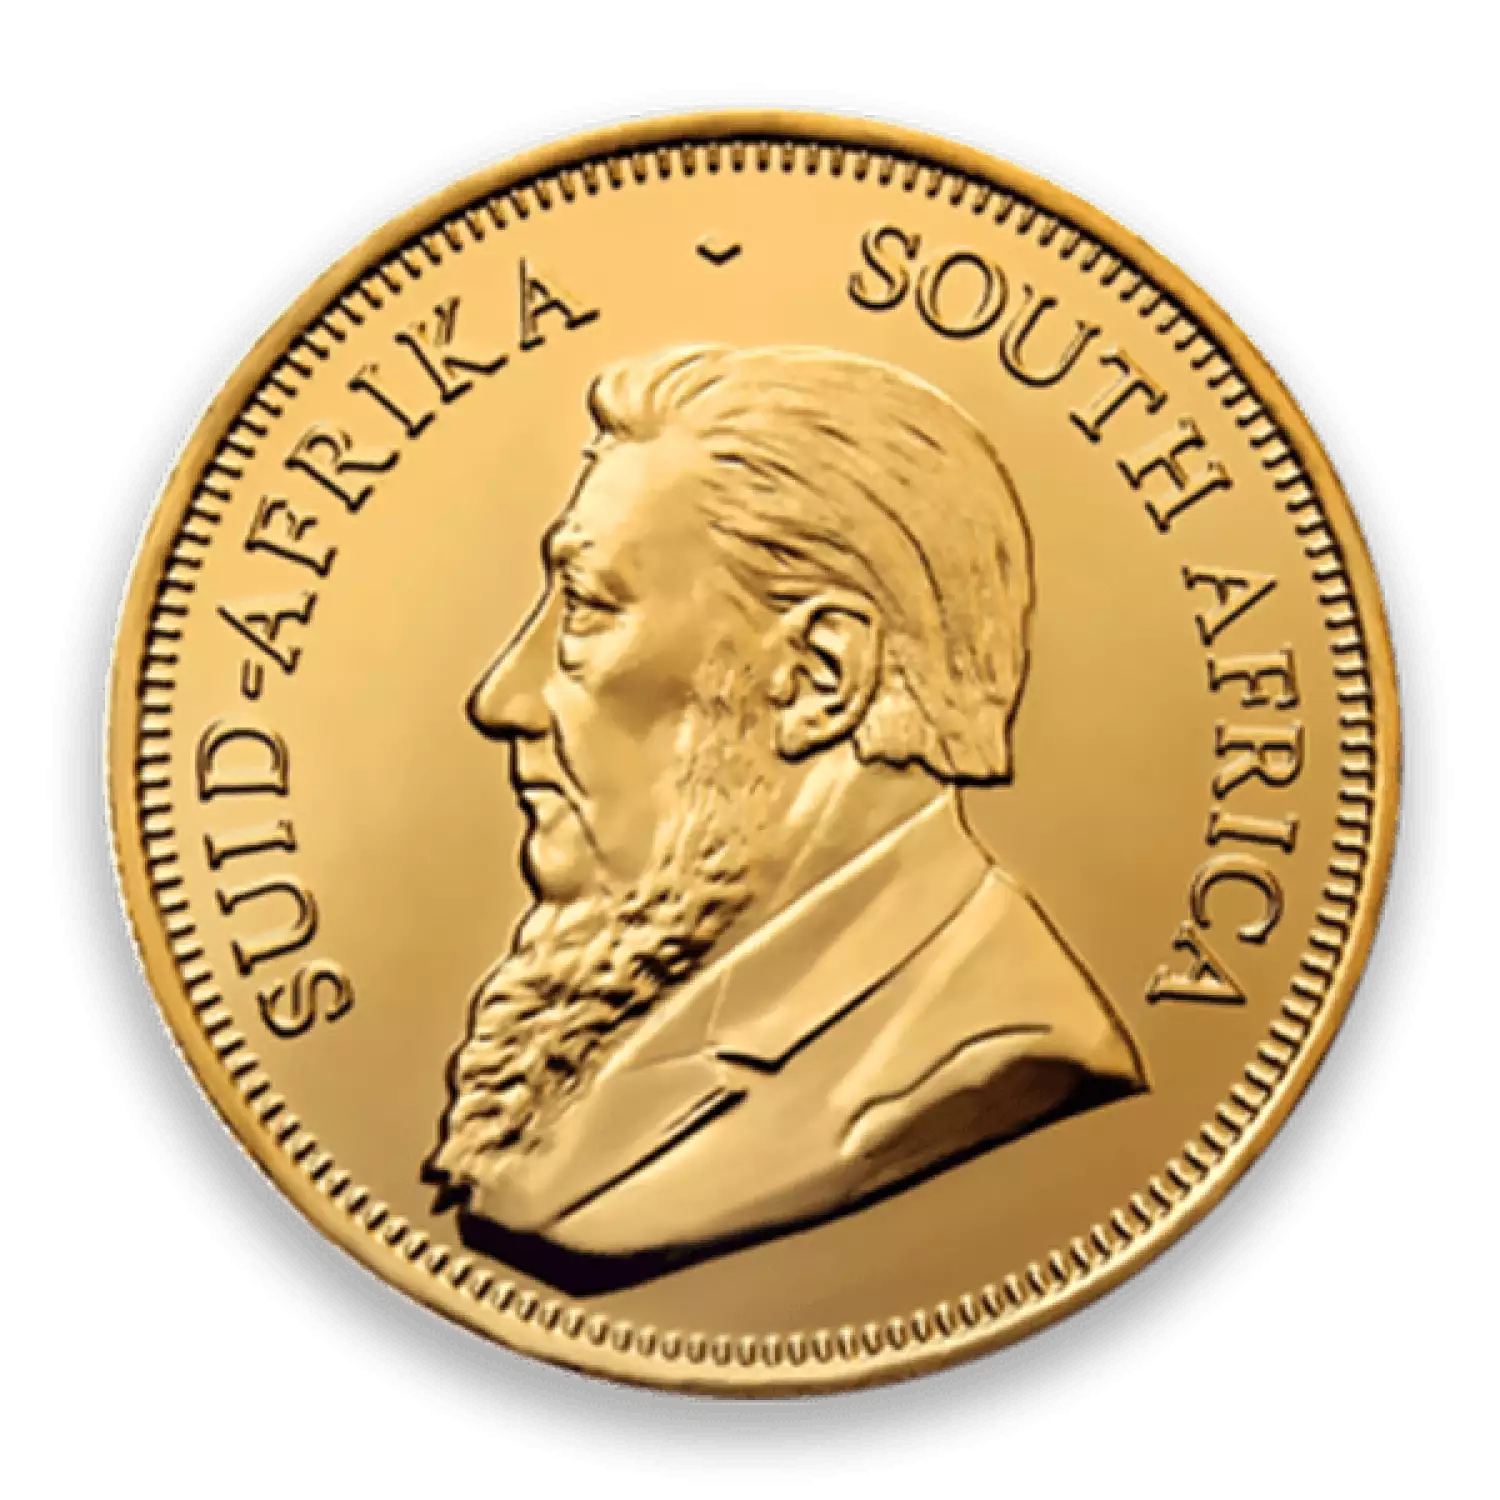 1 oz Gold Coin Krugerrand | South African Gold Coin